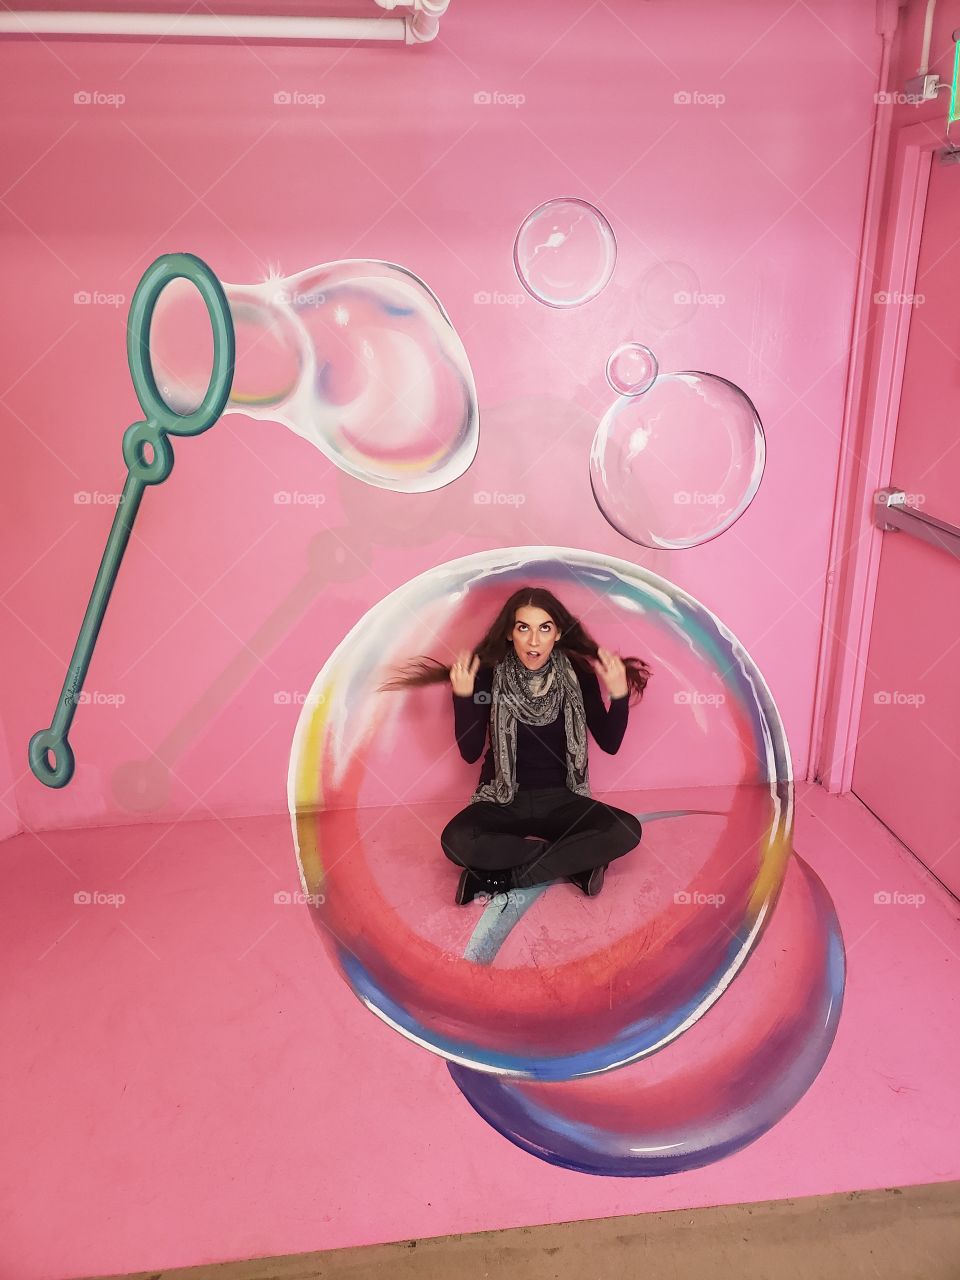 Stuck in a bubble at the museum of illusions.